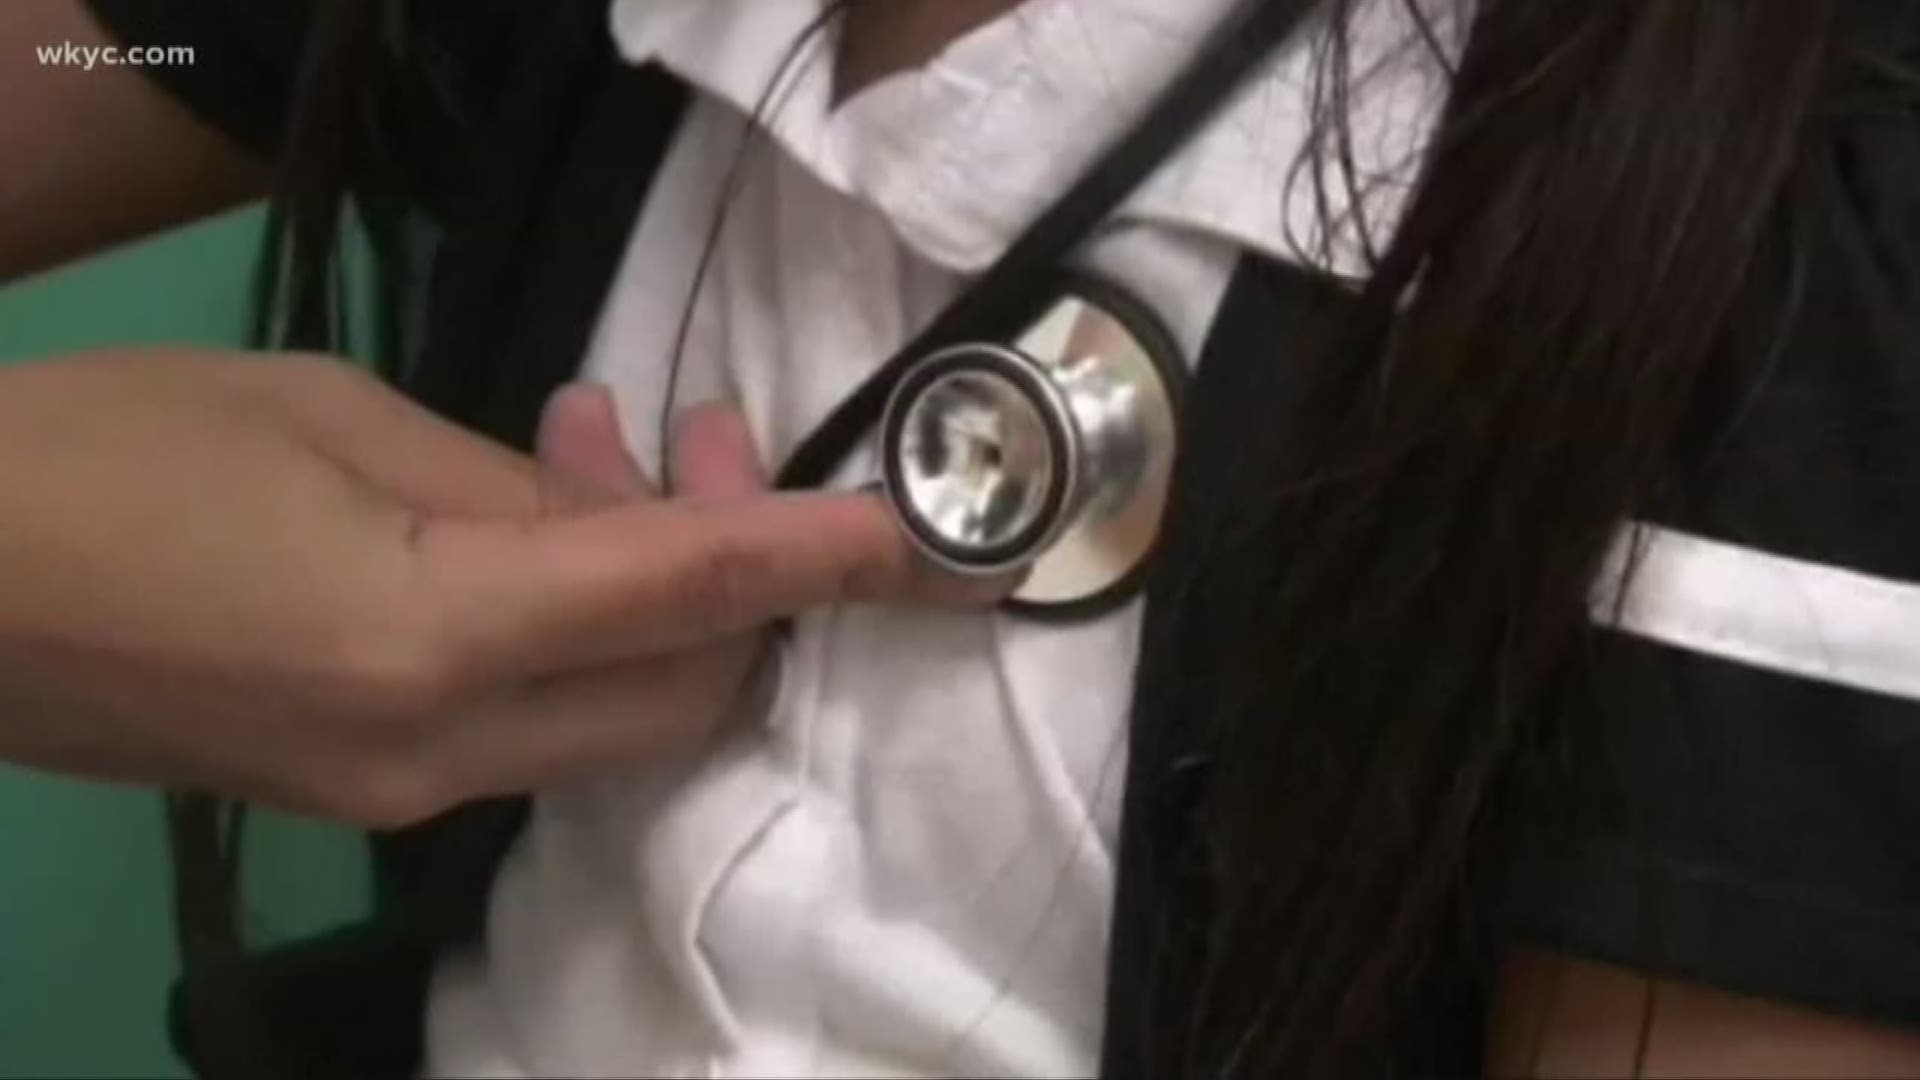 Stethoscopes at doctors offices carry high levels of bacteria